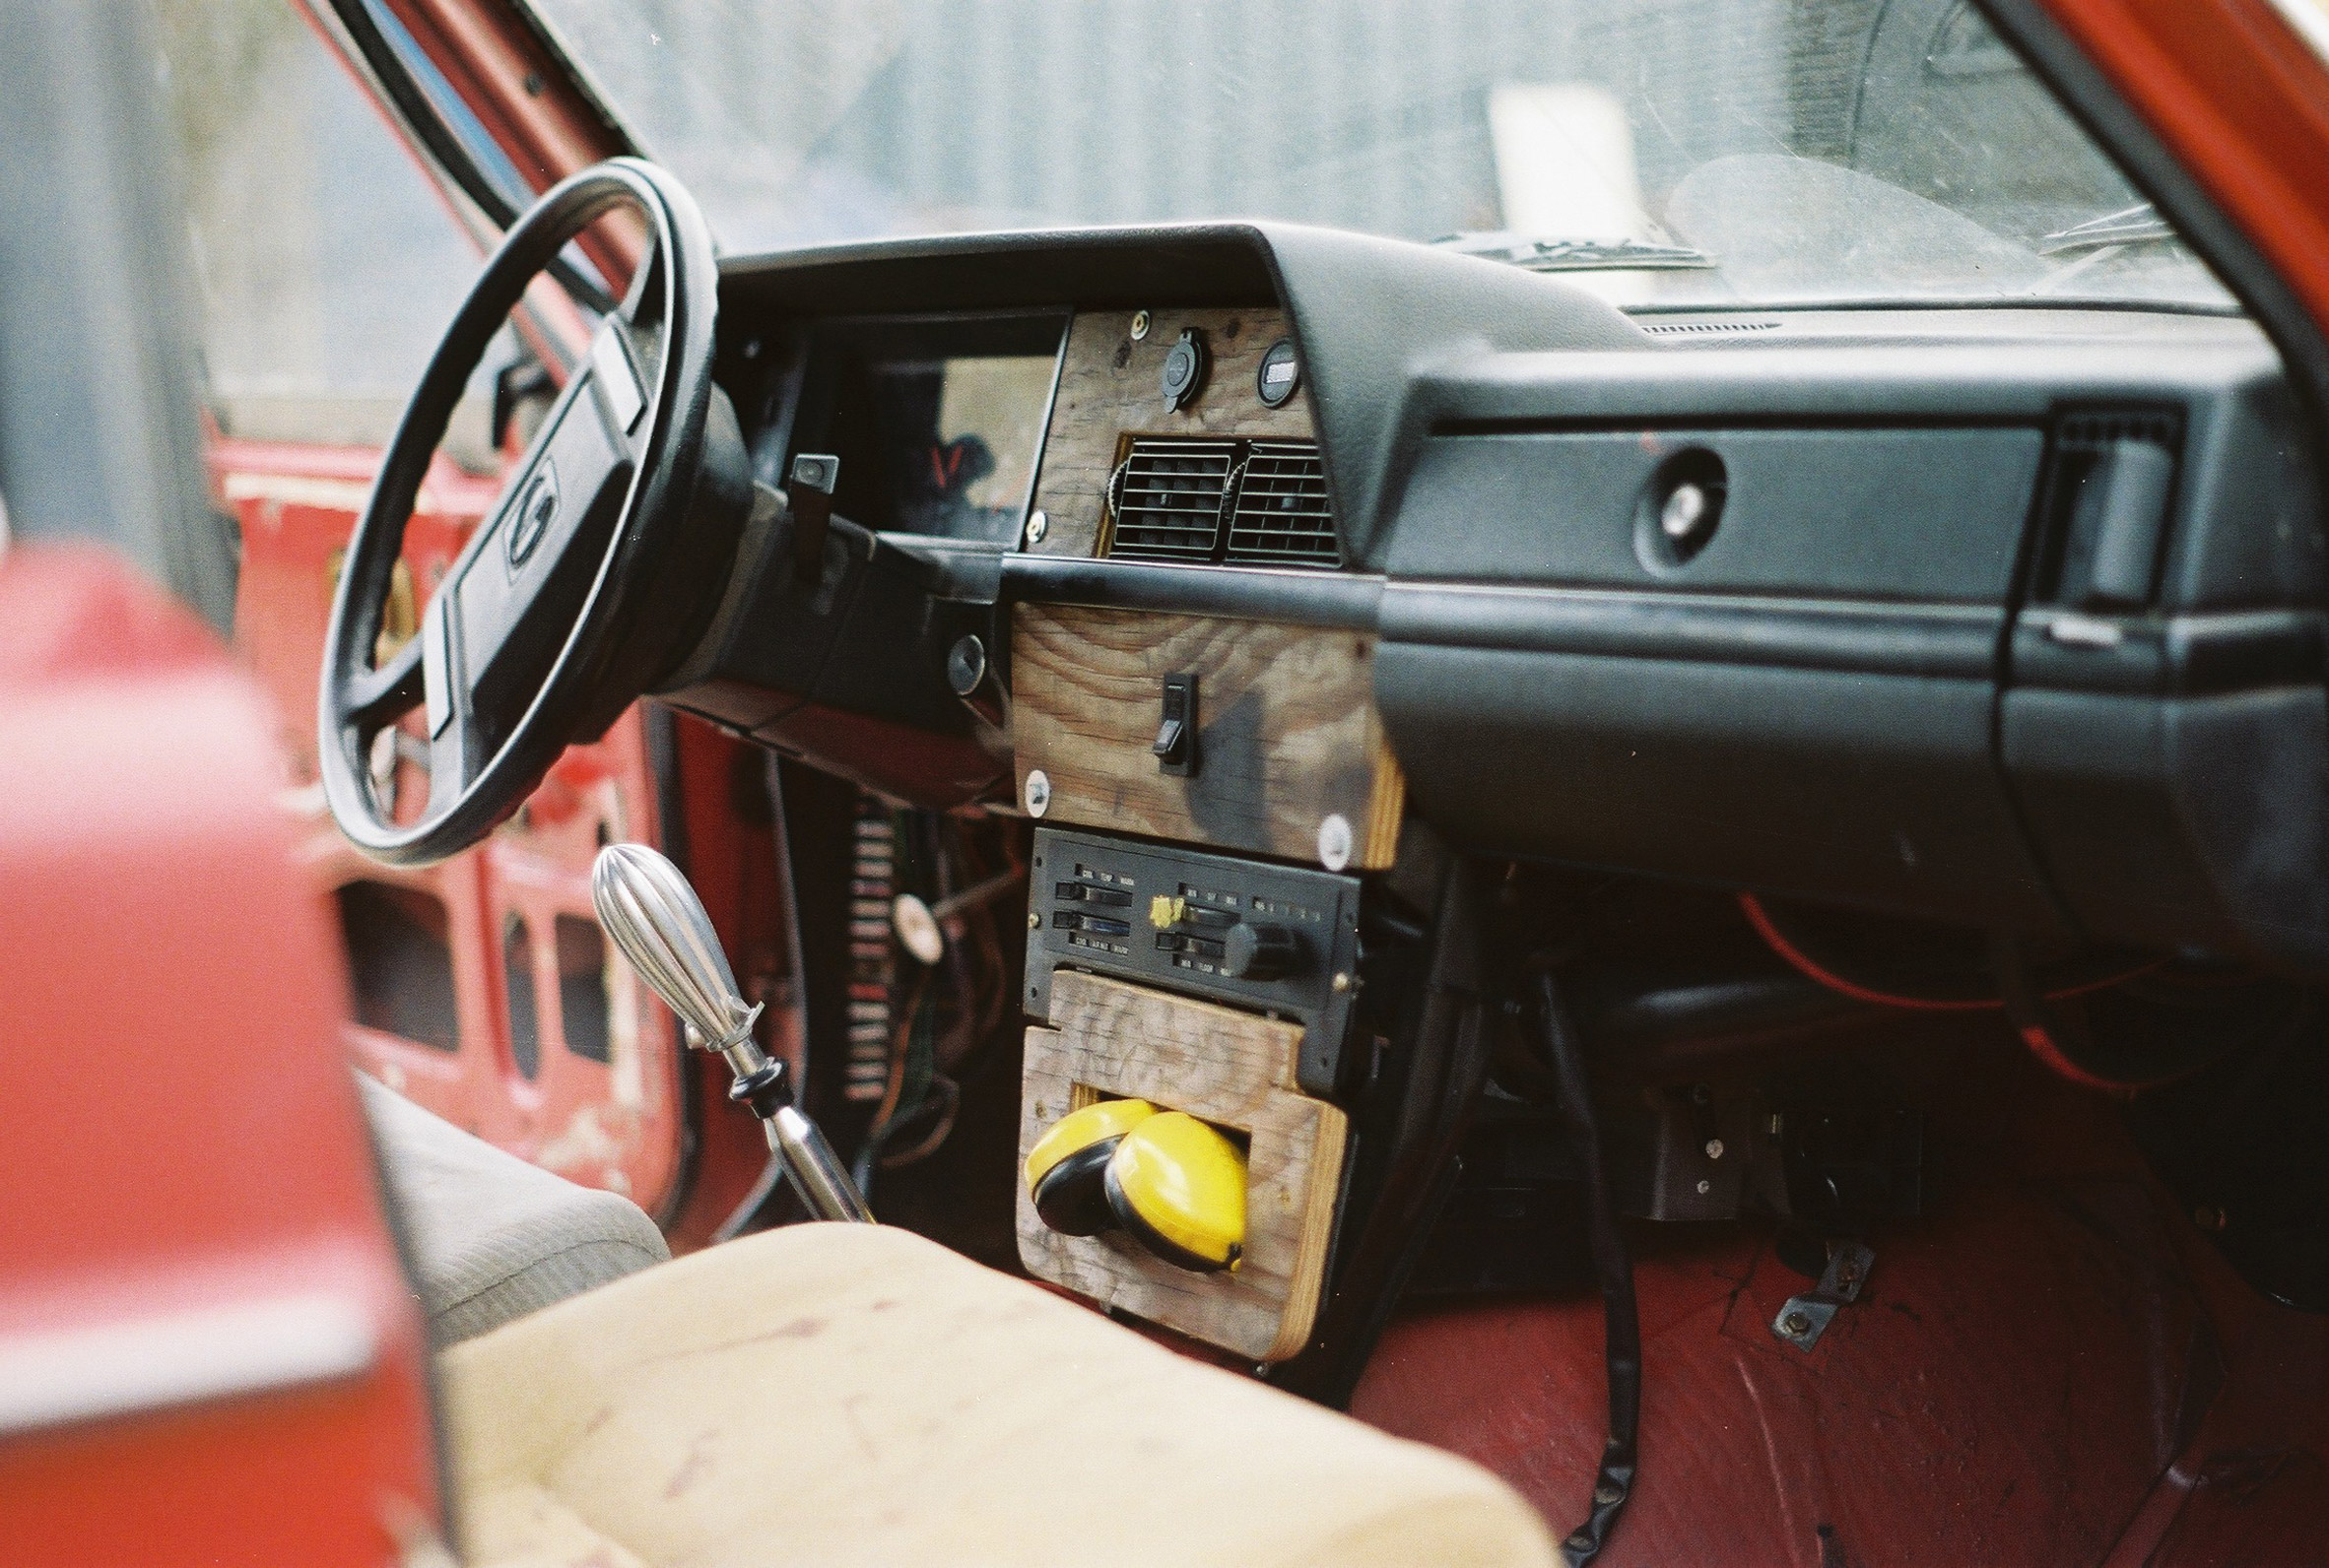 Close-up of the front-seat interior of Gijs Schalkx' Plastic Car, showing an old dashboard with some parts made of wood